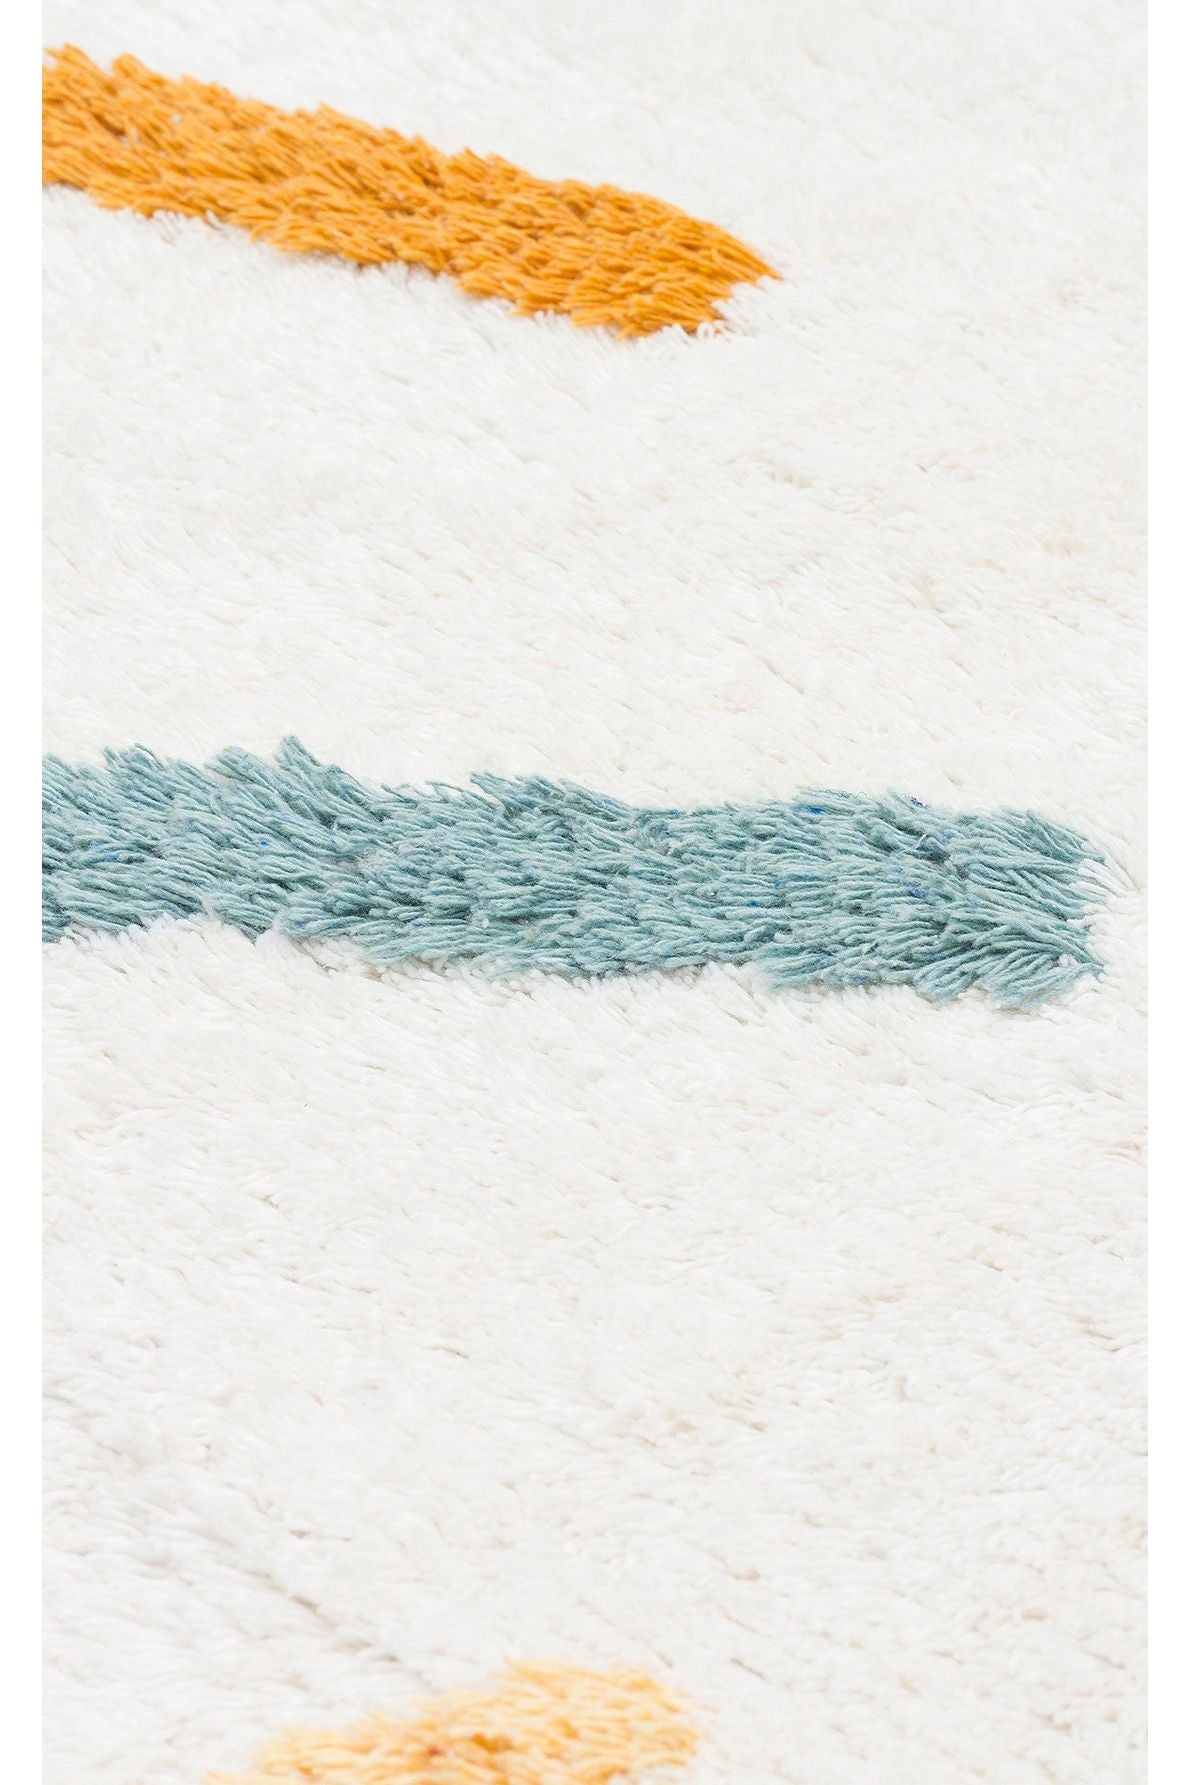 #Turkish_Carpets_Rugs# #Modern_Carpets# #Abrash_Carpets#Washable, Non-Slippary, Natural Baby Rugs With CottonCbn 03 Multy Xw Q